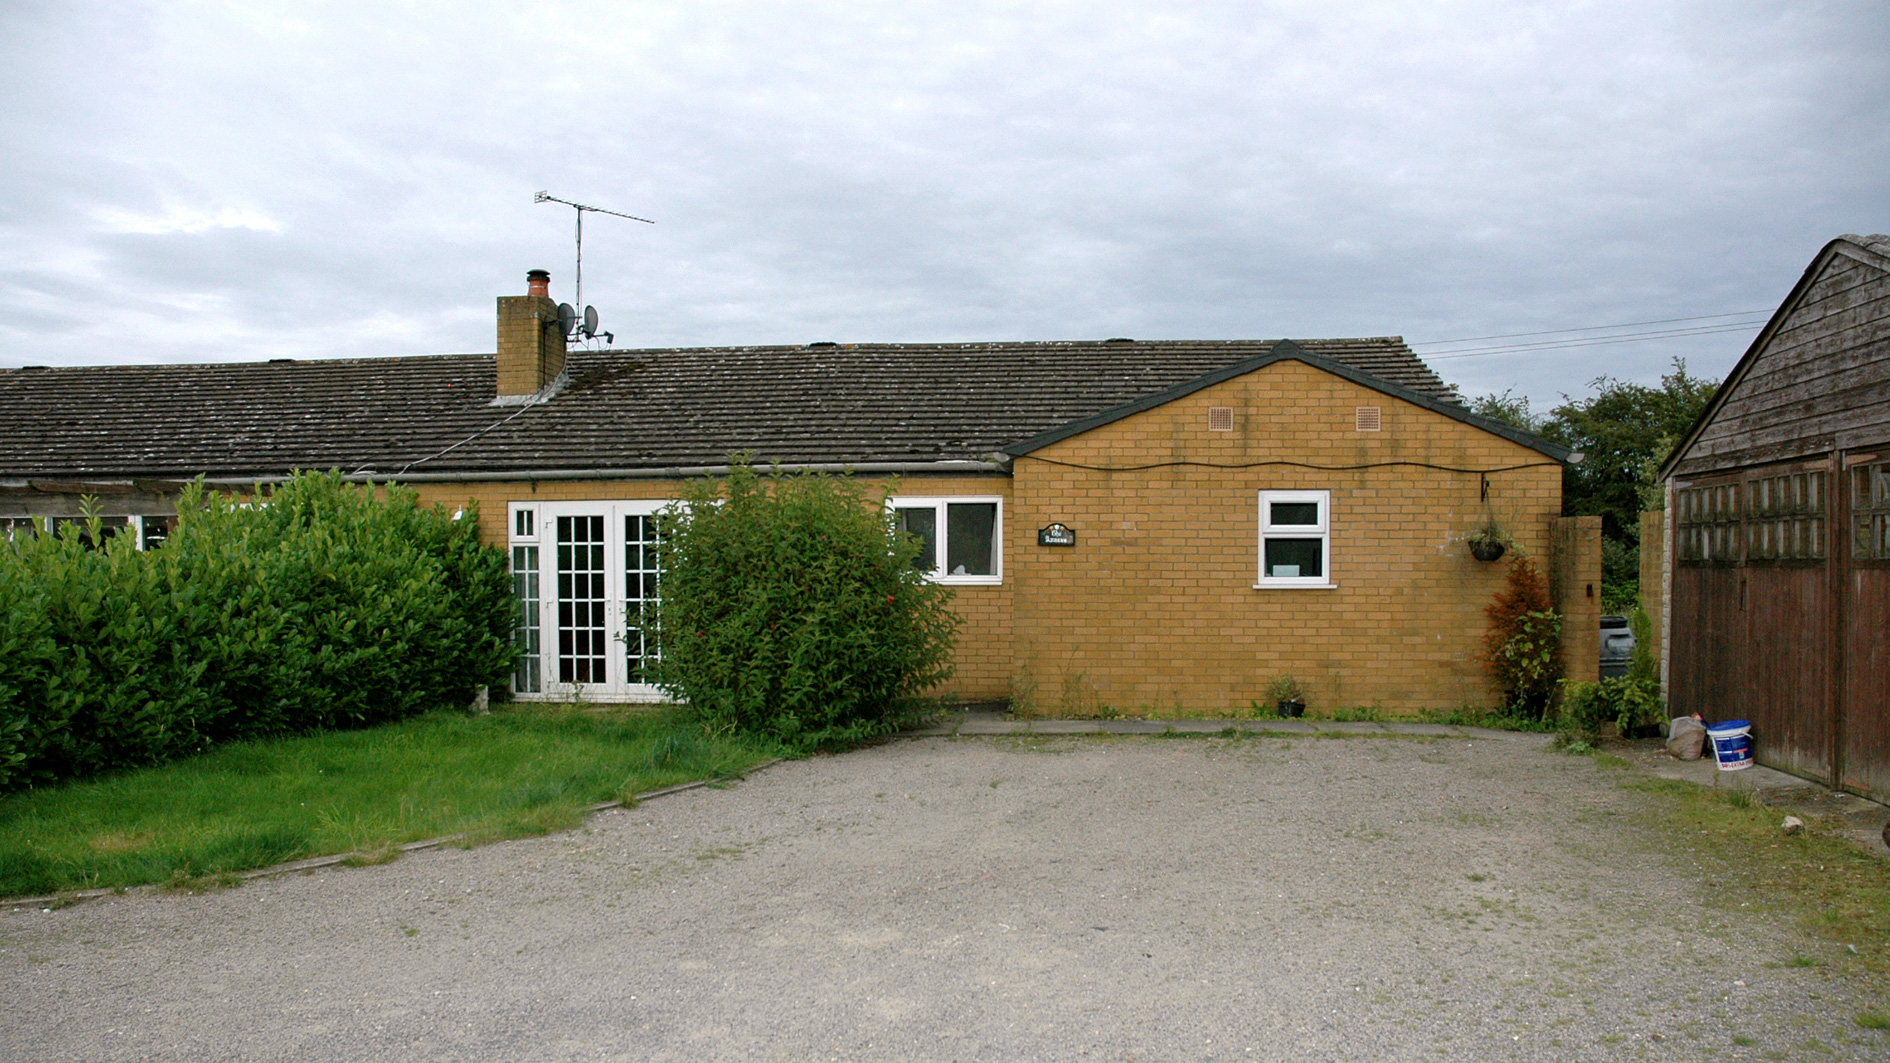 Bungalow & land for sale in Studham